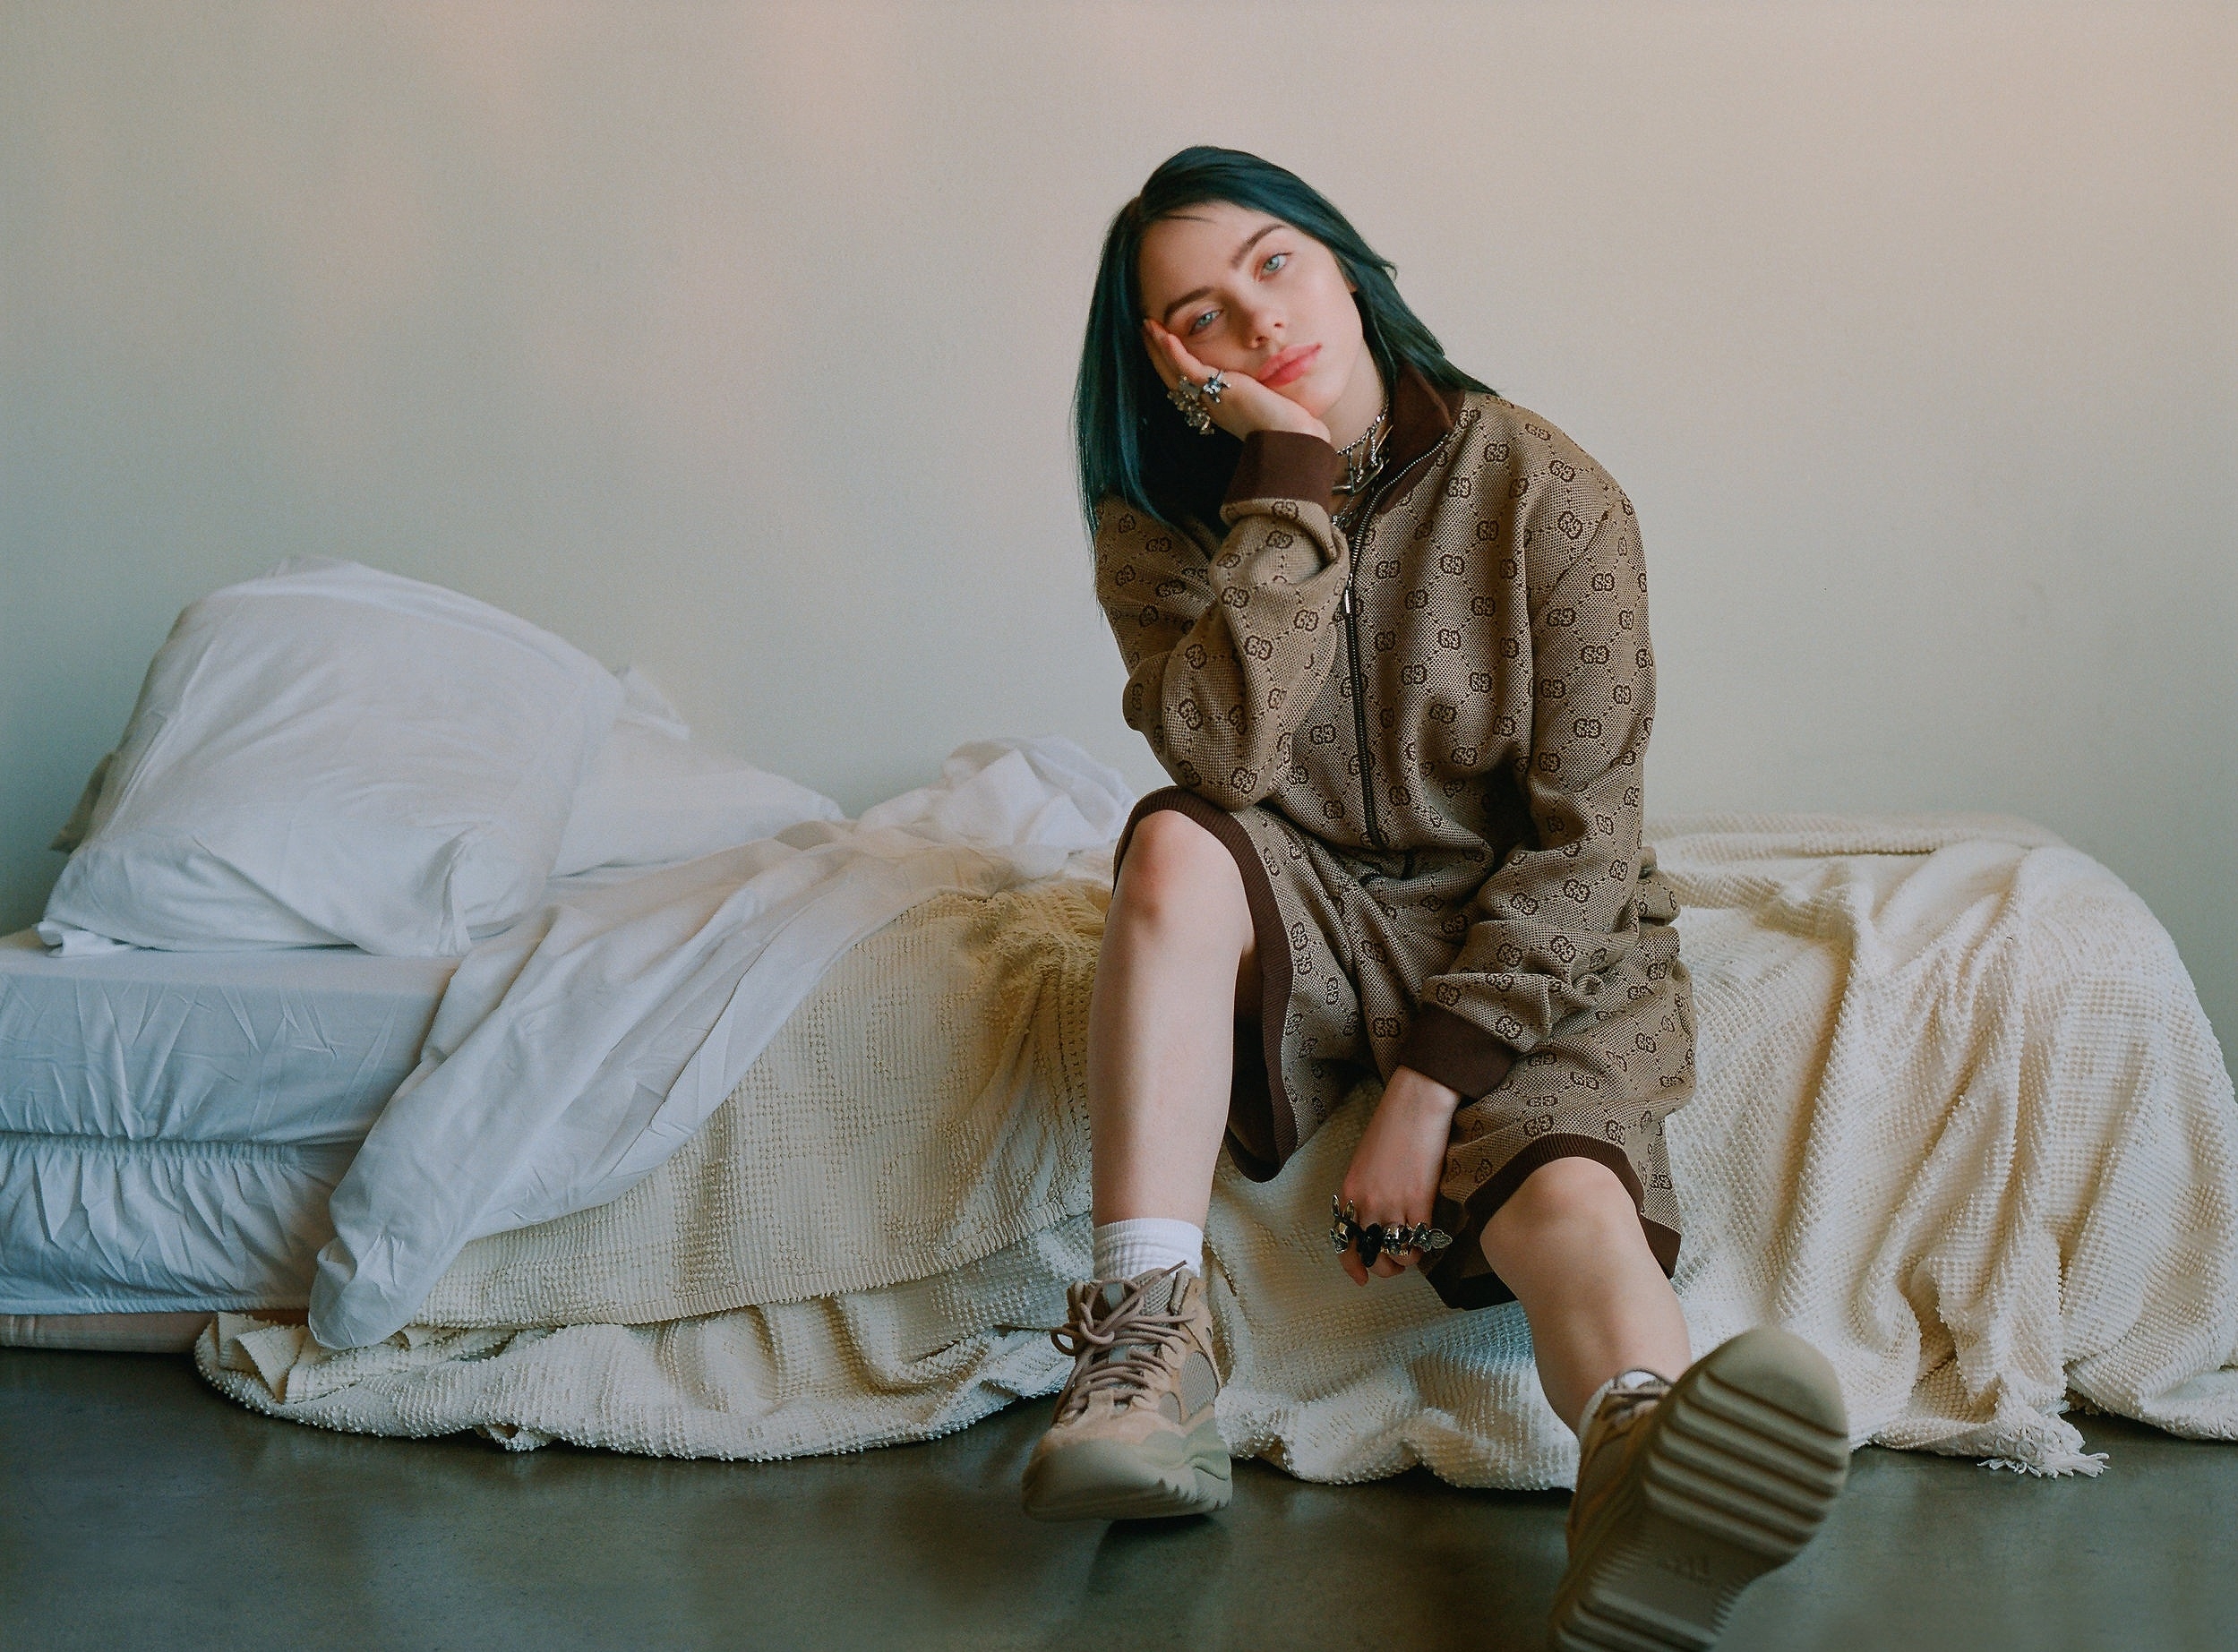 2560x1440 Billie Eilish 19 Magazine 2560x1440 Resolution Wallpaper Hd Celebrities 4k Wallpapers Images Photos And Background Wallpapers Den